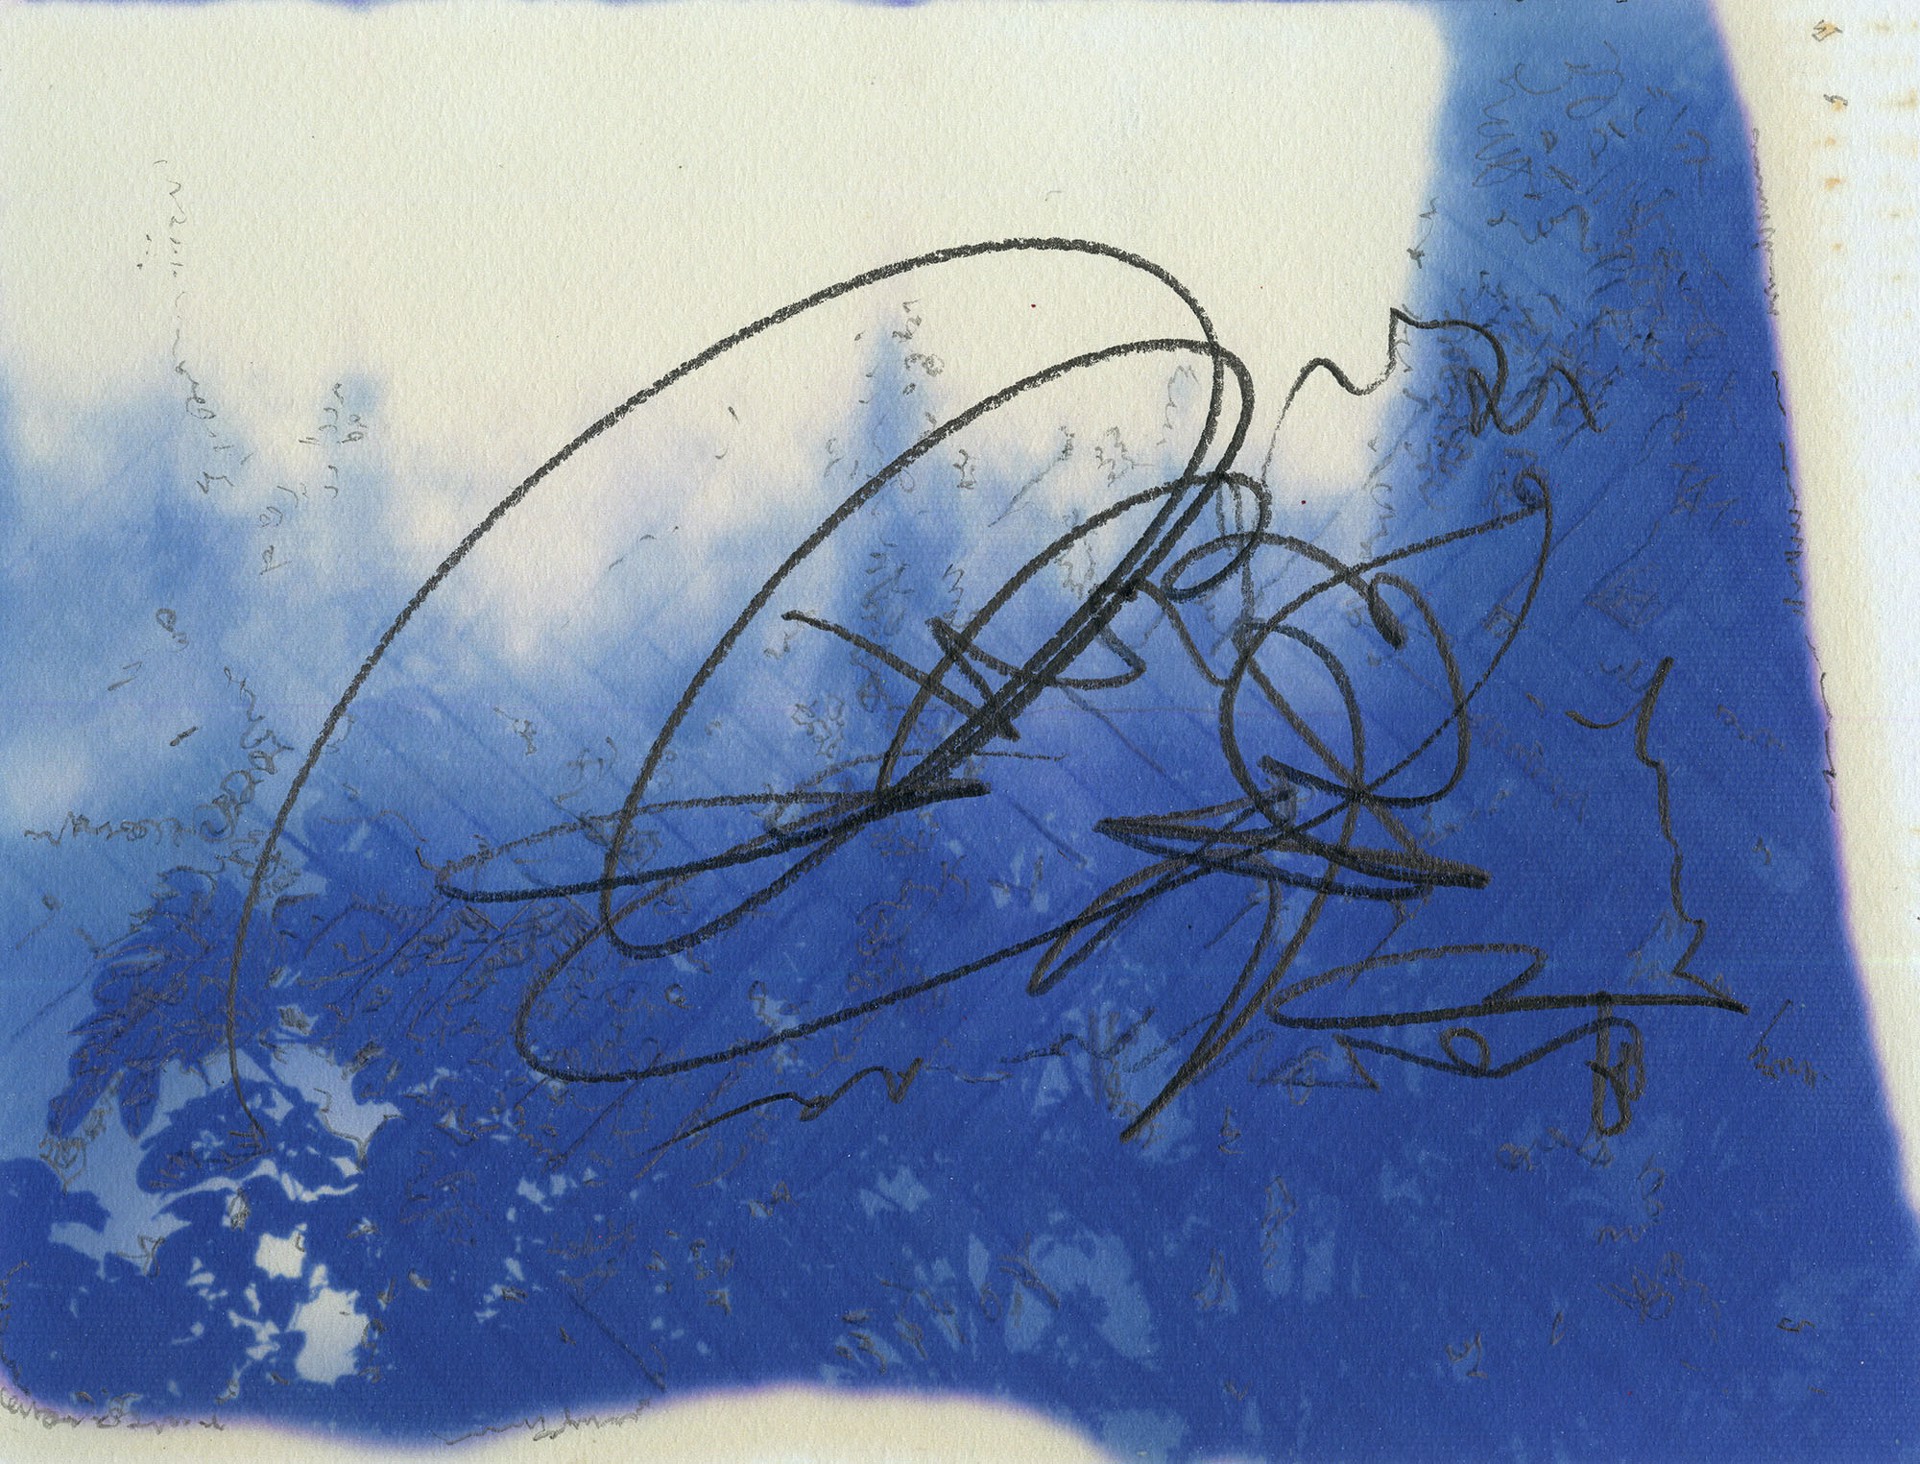 Untitled (From the series of Experimental No.3) by Peng Zhou